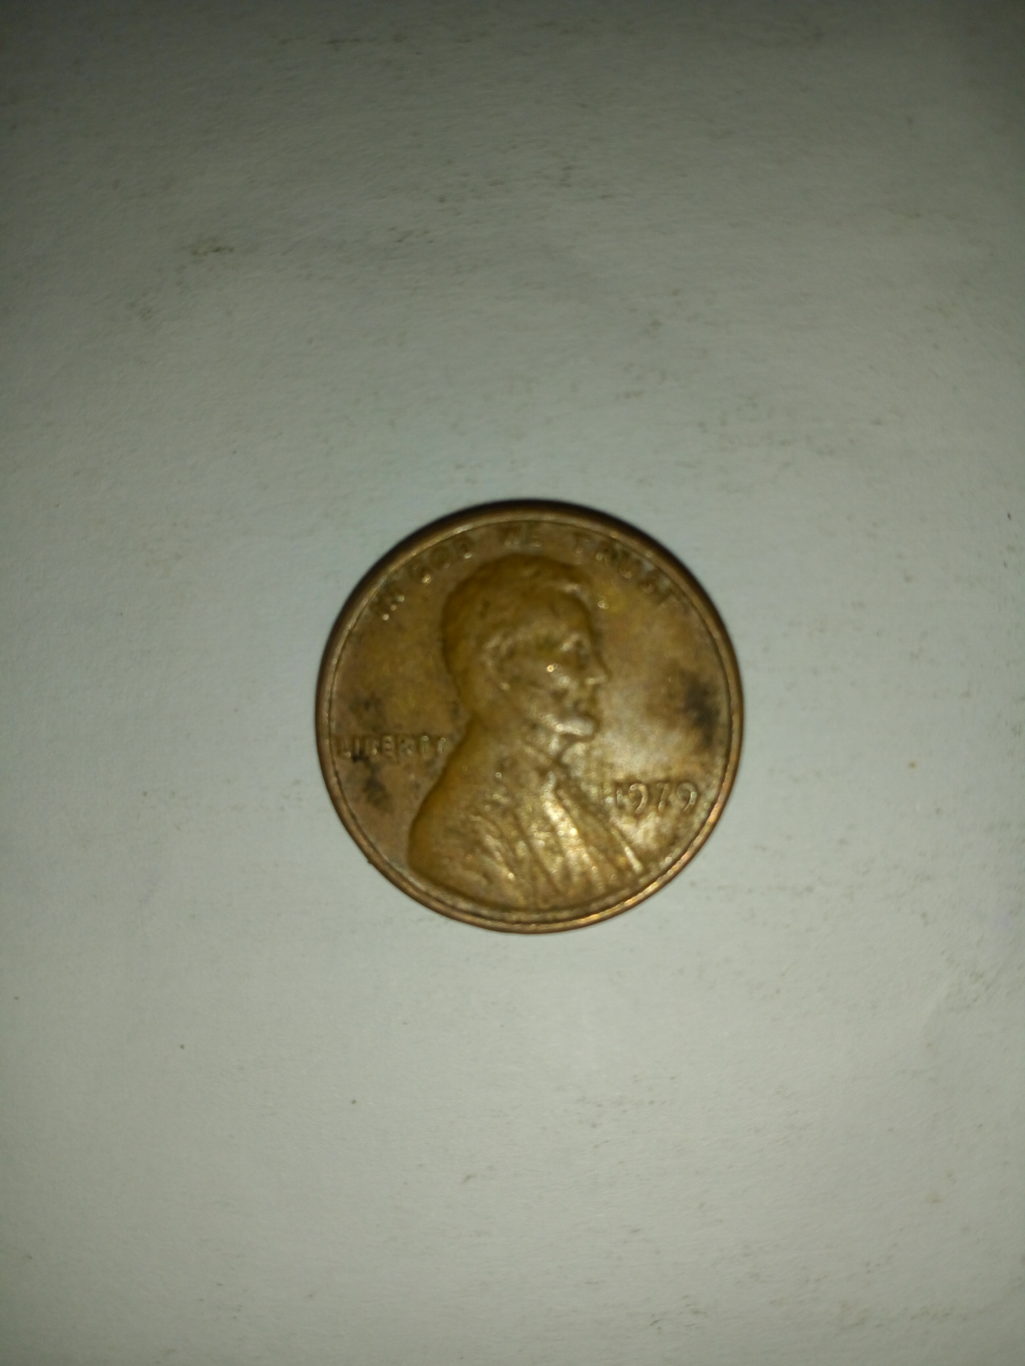 1979_united States of america 1 cent